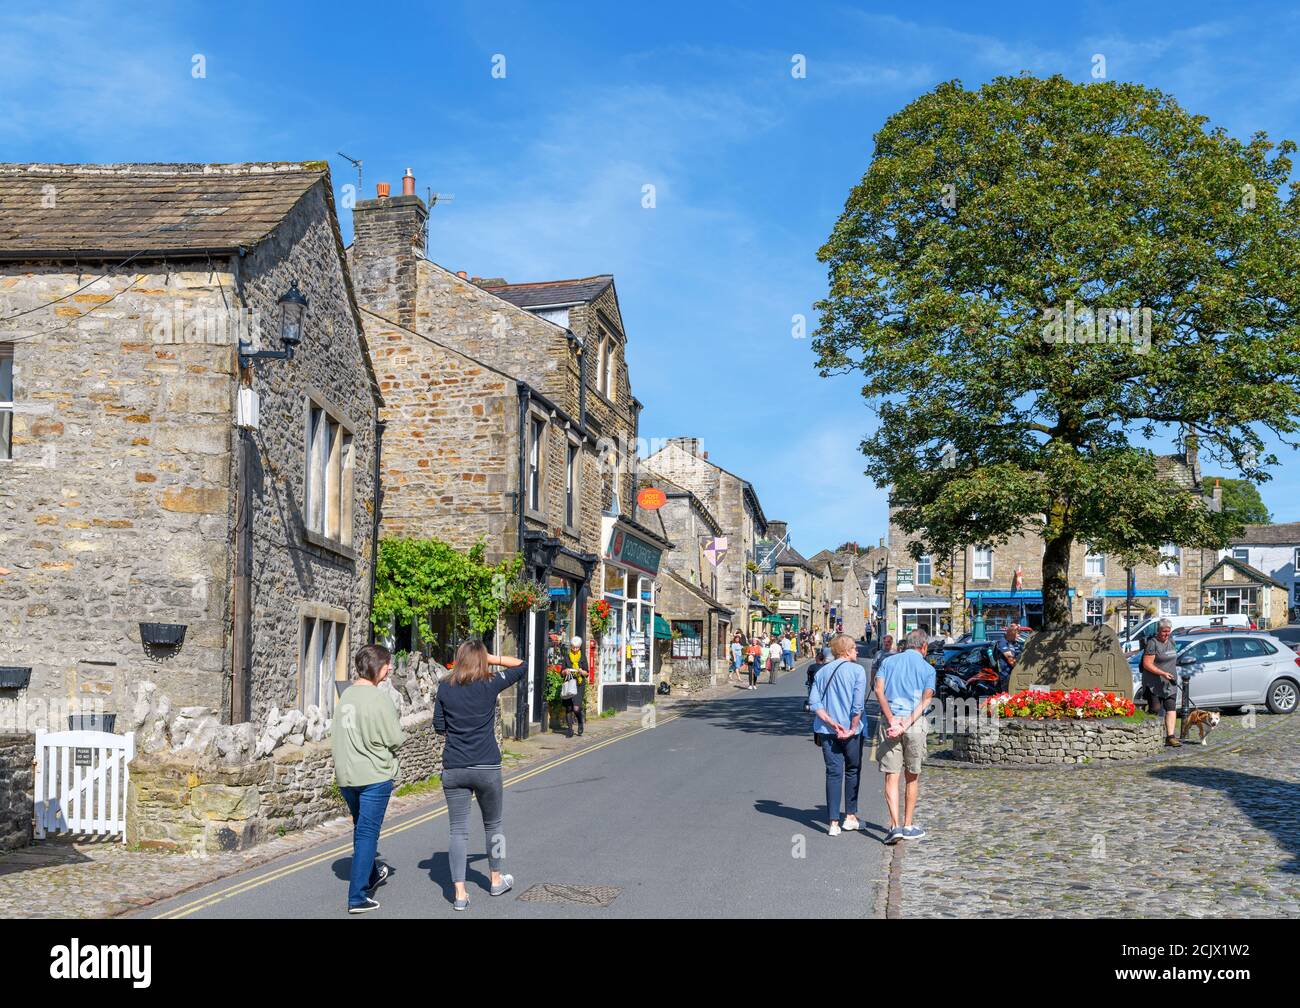 The Square and Main Street in the  traditional English village of Grassington, Yorkshire Dales National Park, North Yorkshire, England, UK. Stock Photo